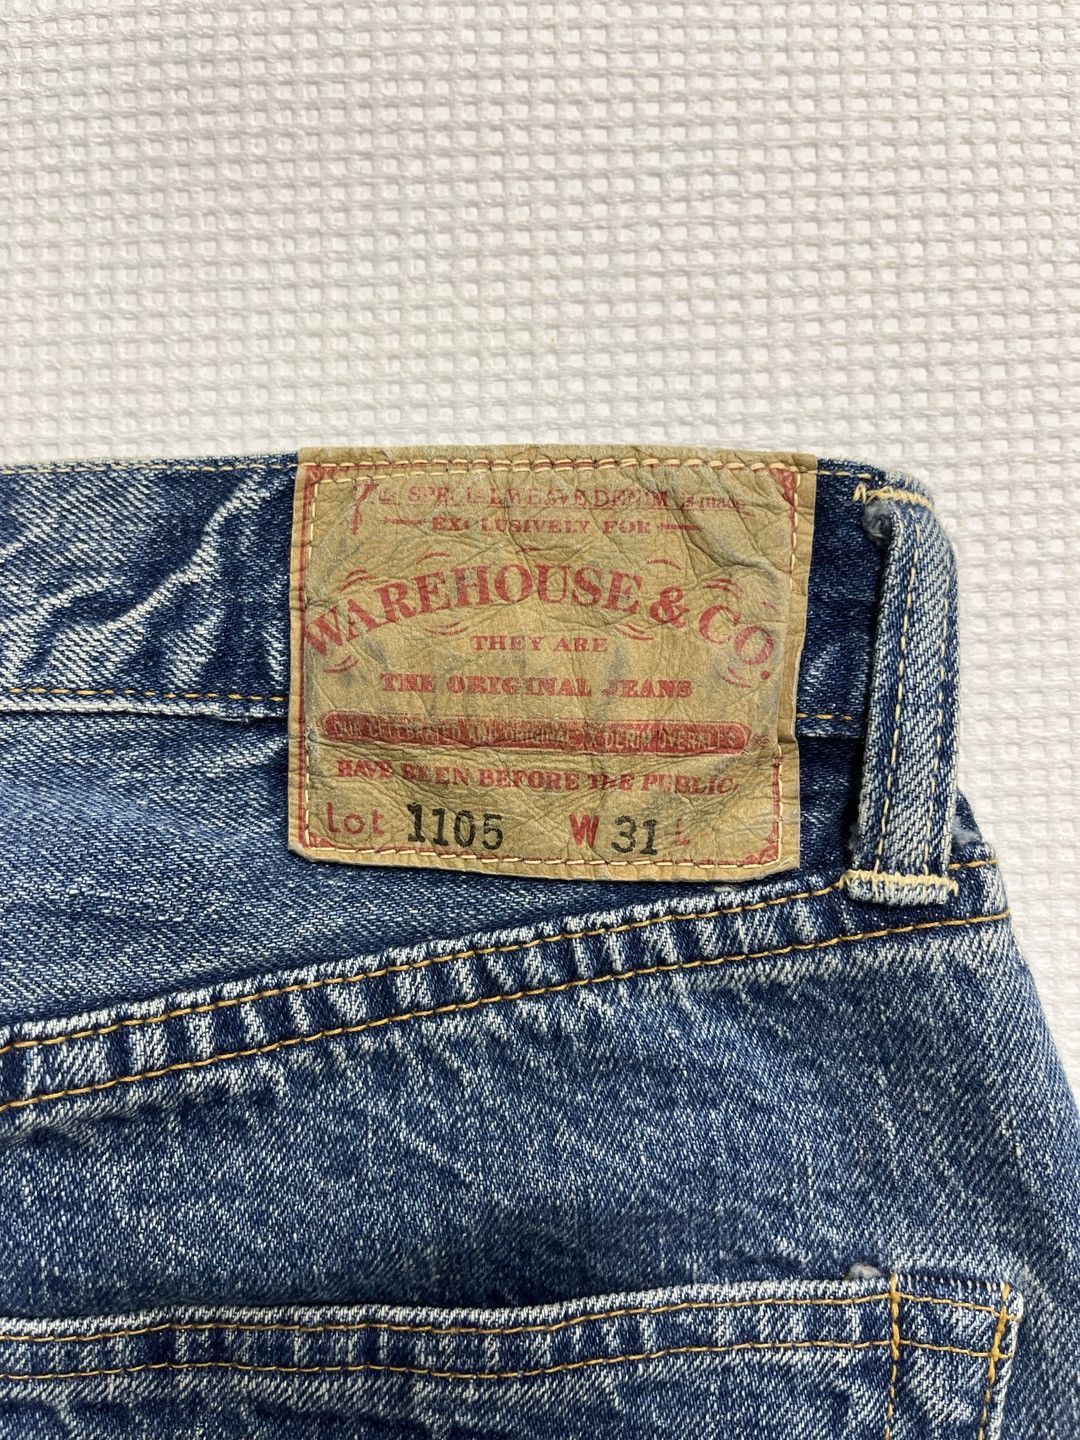 Warehouse Warehouse & Co. Lot. 1105 2nd Hand One wash (size = 31